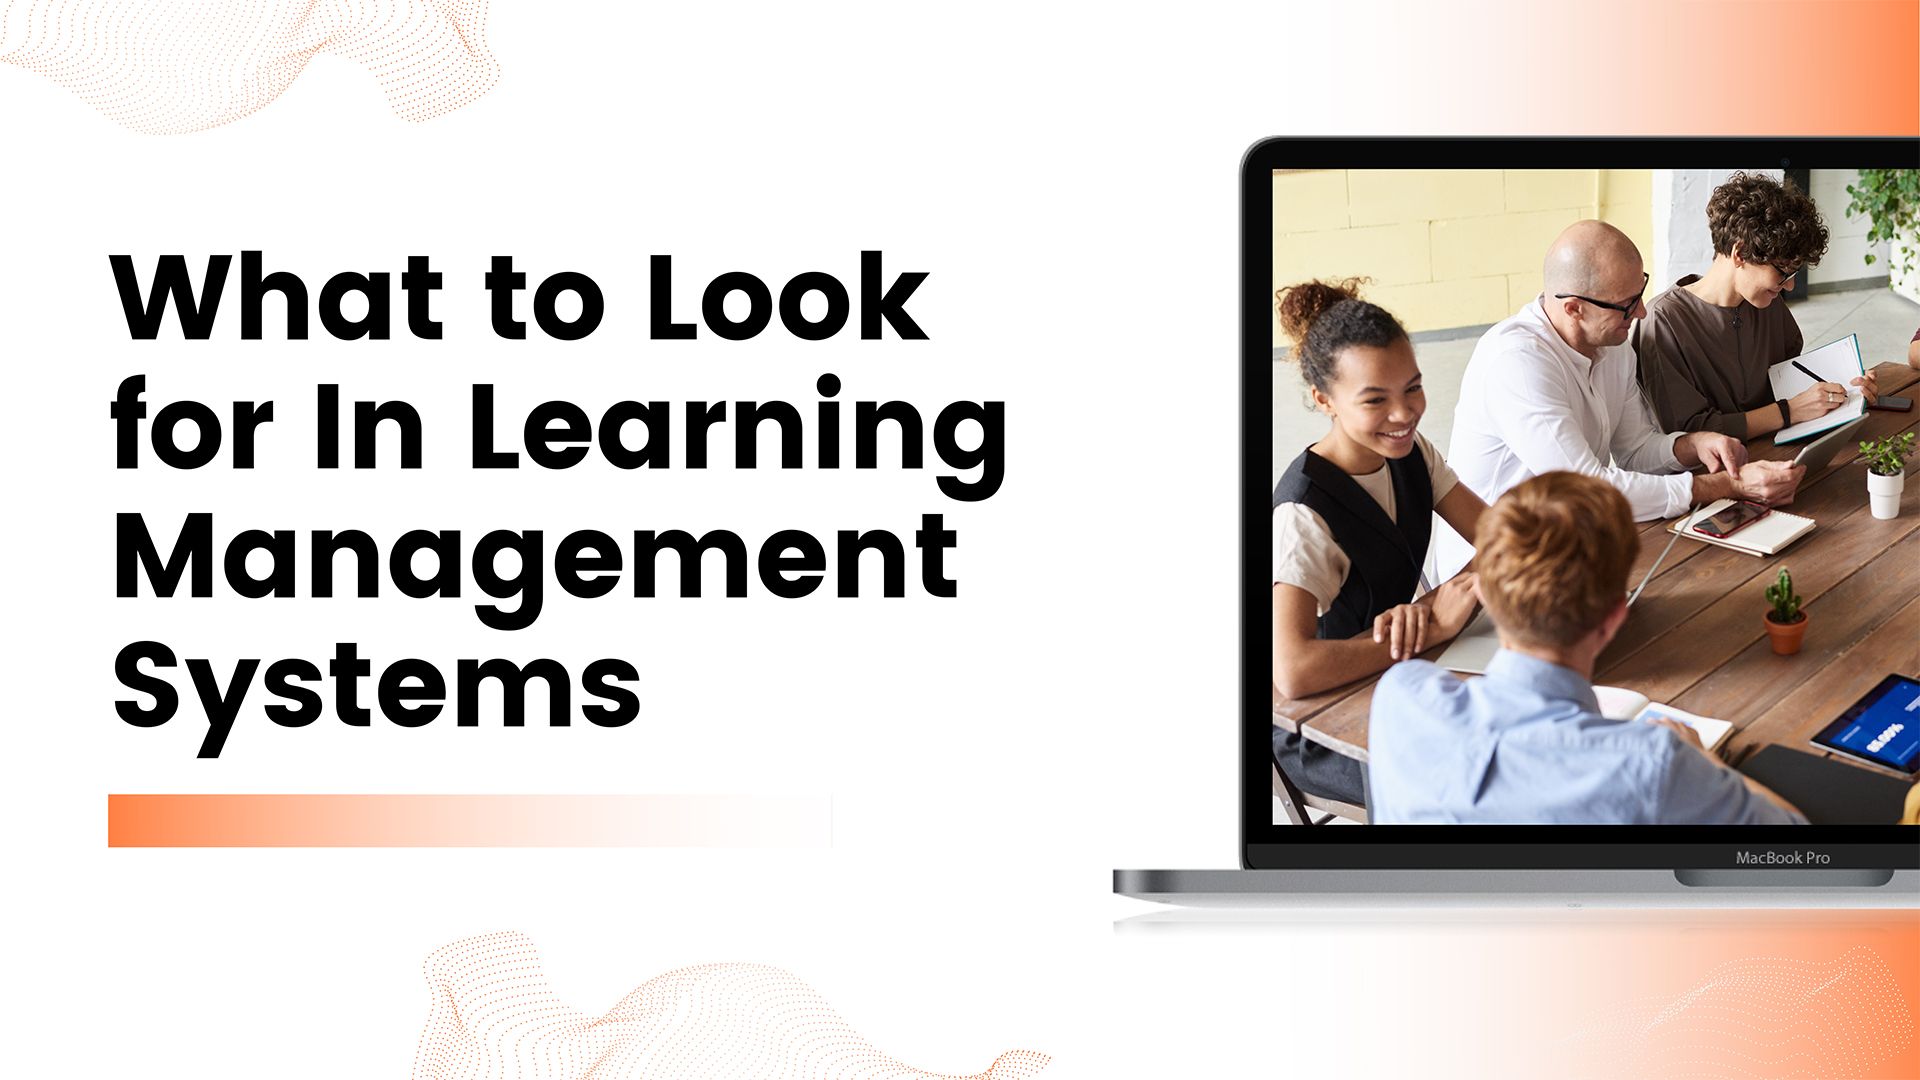 What to Look for in Learning Management Systems